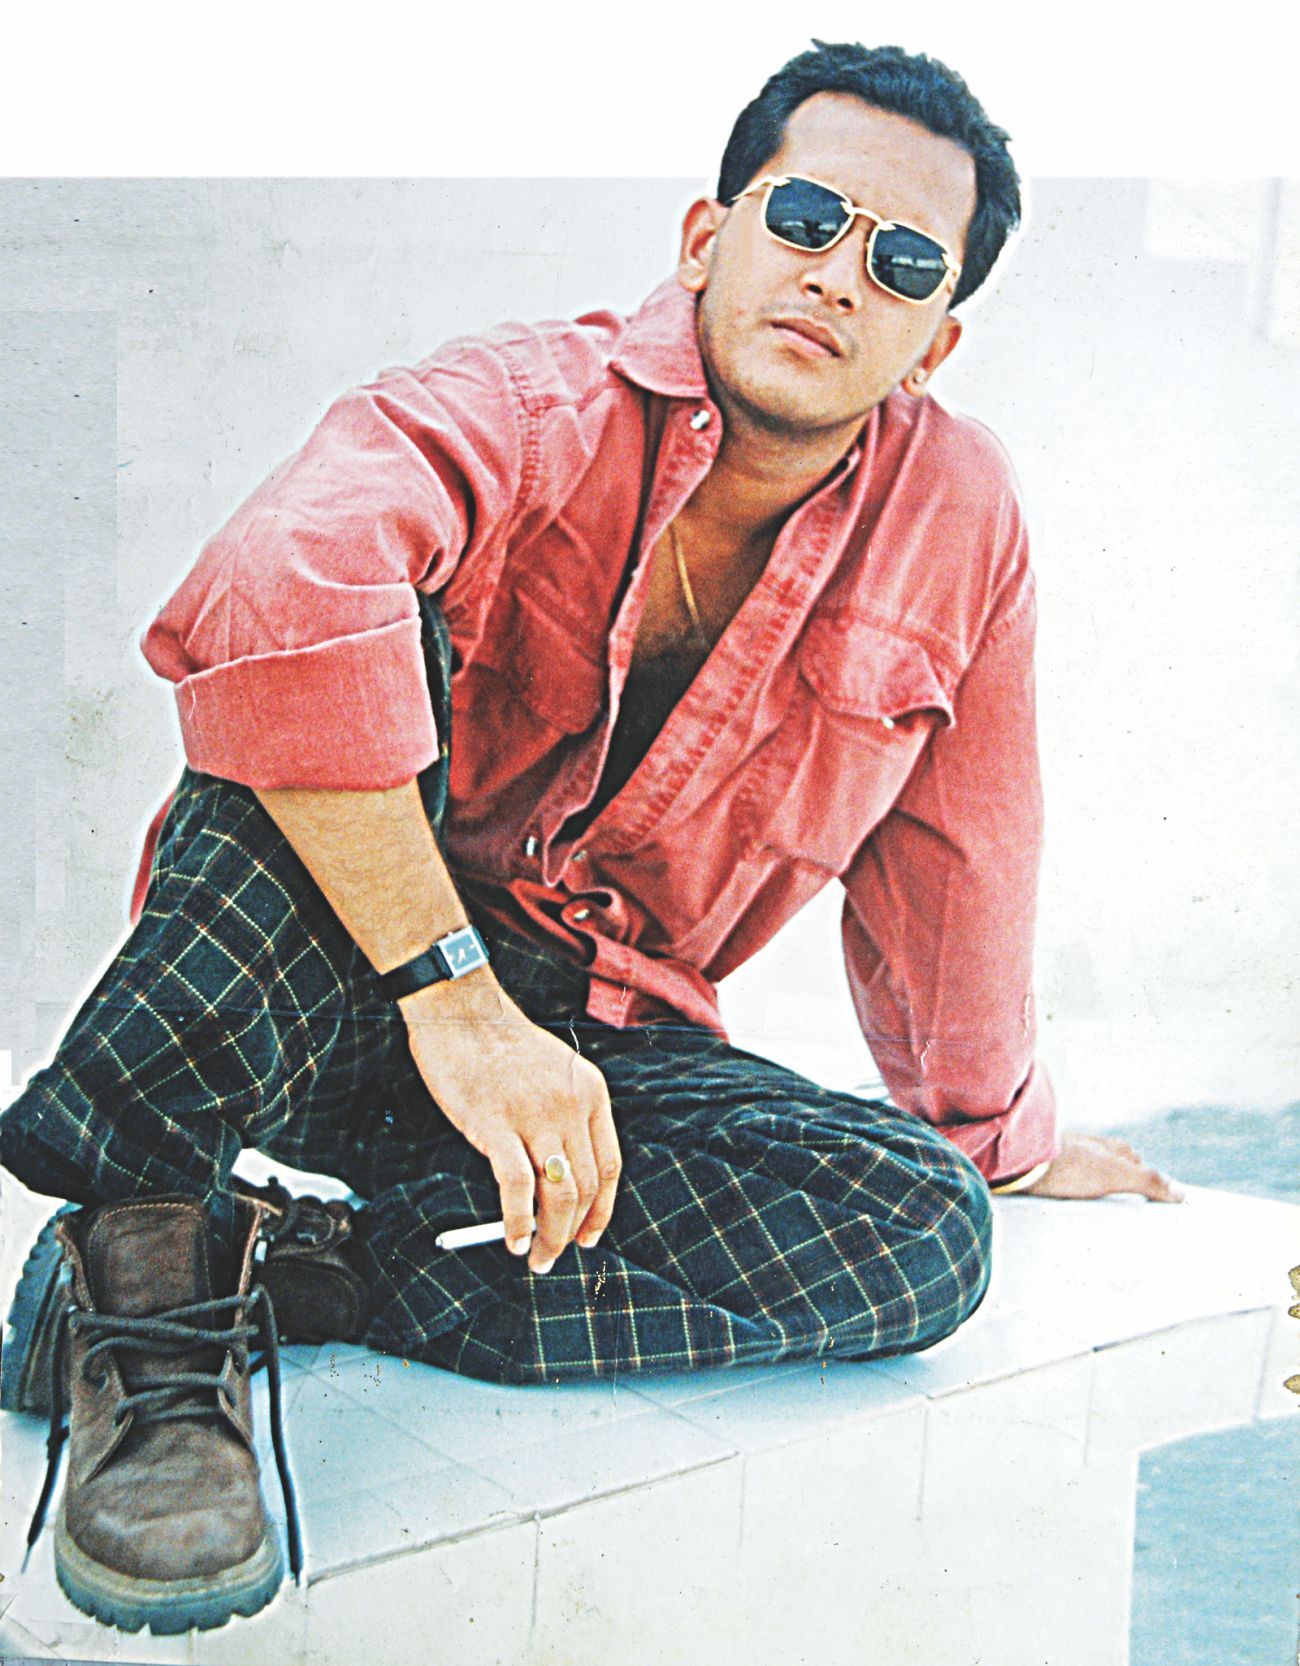 Born on September 19 in 1971 in Sylhet, Salman Shah started his career with the television serial  ‘Pathor Shomoy’. He made his debut in the film industry in 1993 with the movie ‘Keyamat Theke Keyamat’ with Moushumi at the age of 22. 